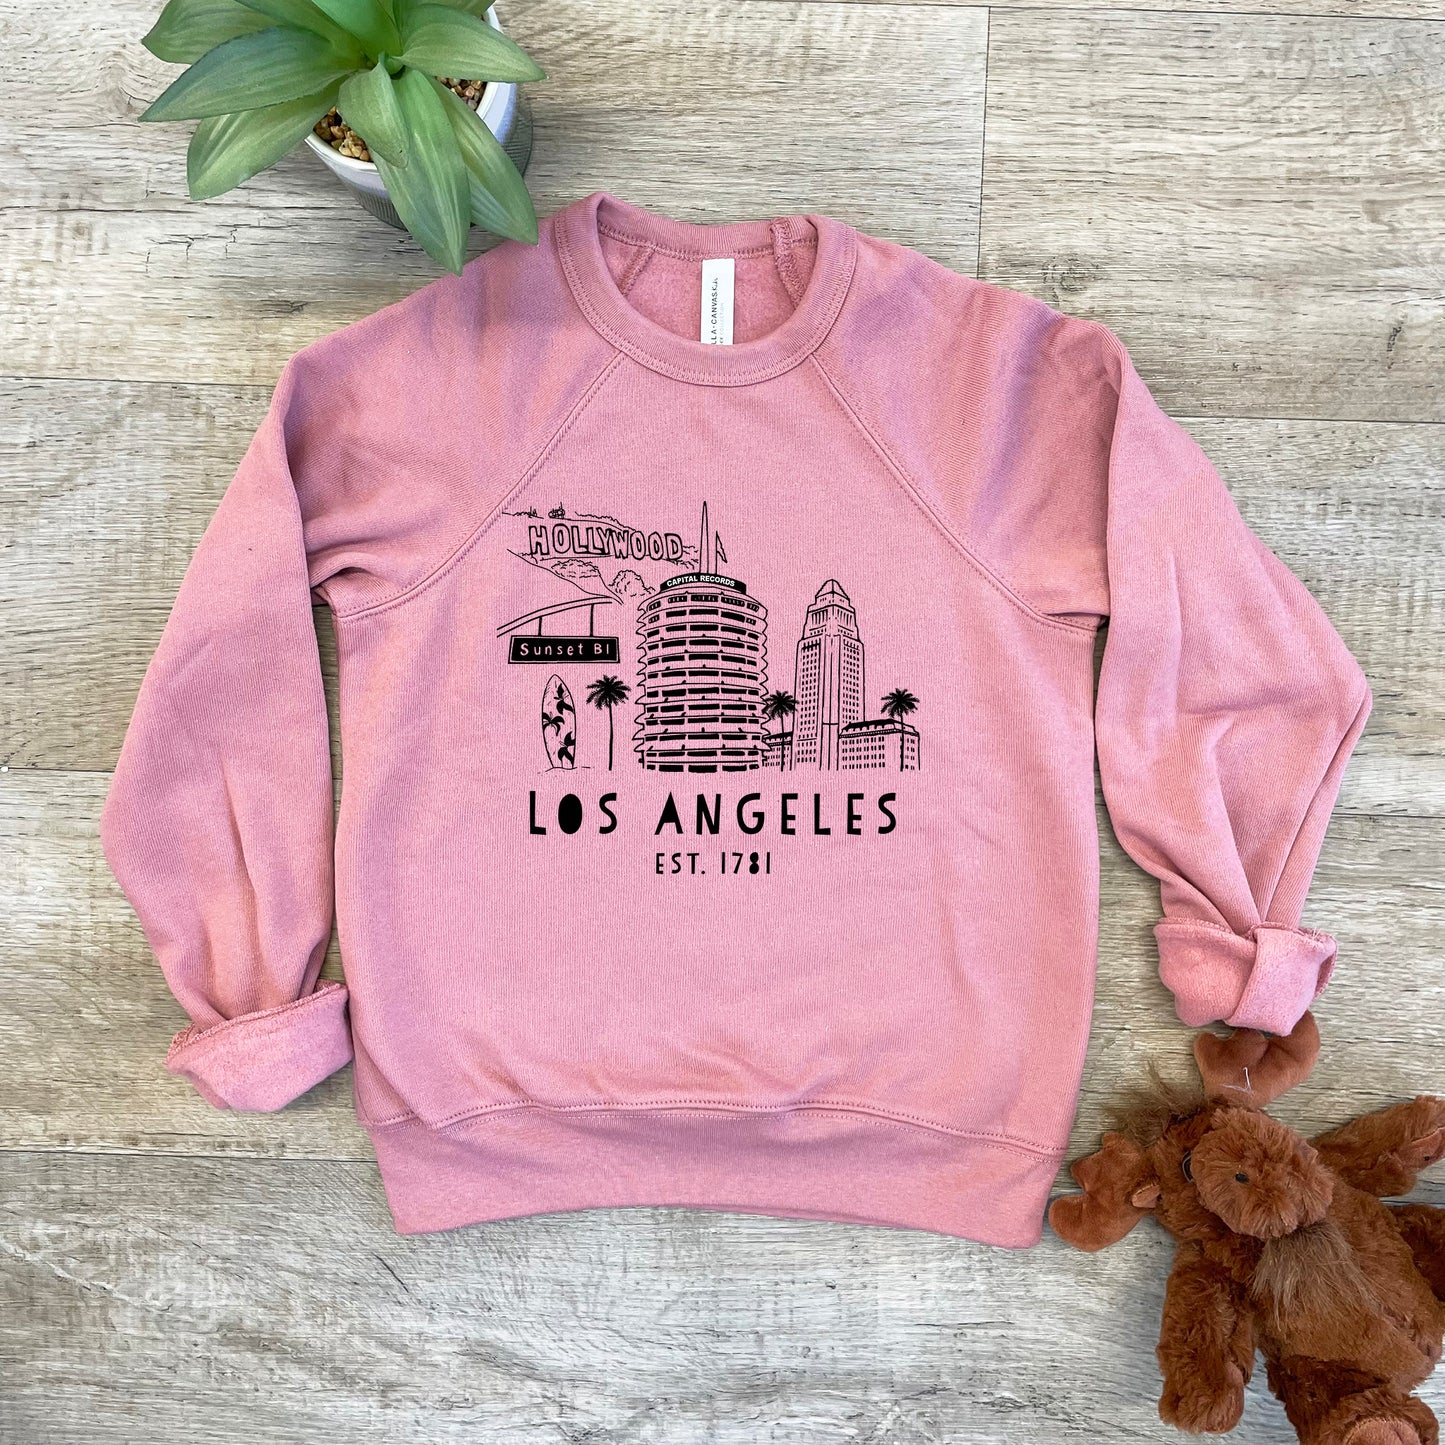 a pink sweatshirt with the los angeles skyline on it next to a teddy bear